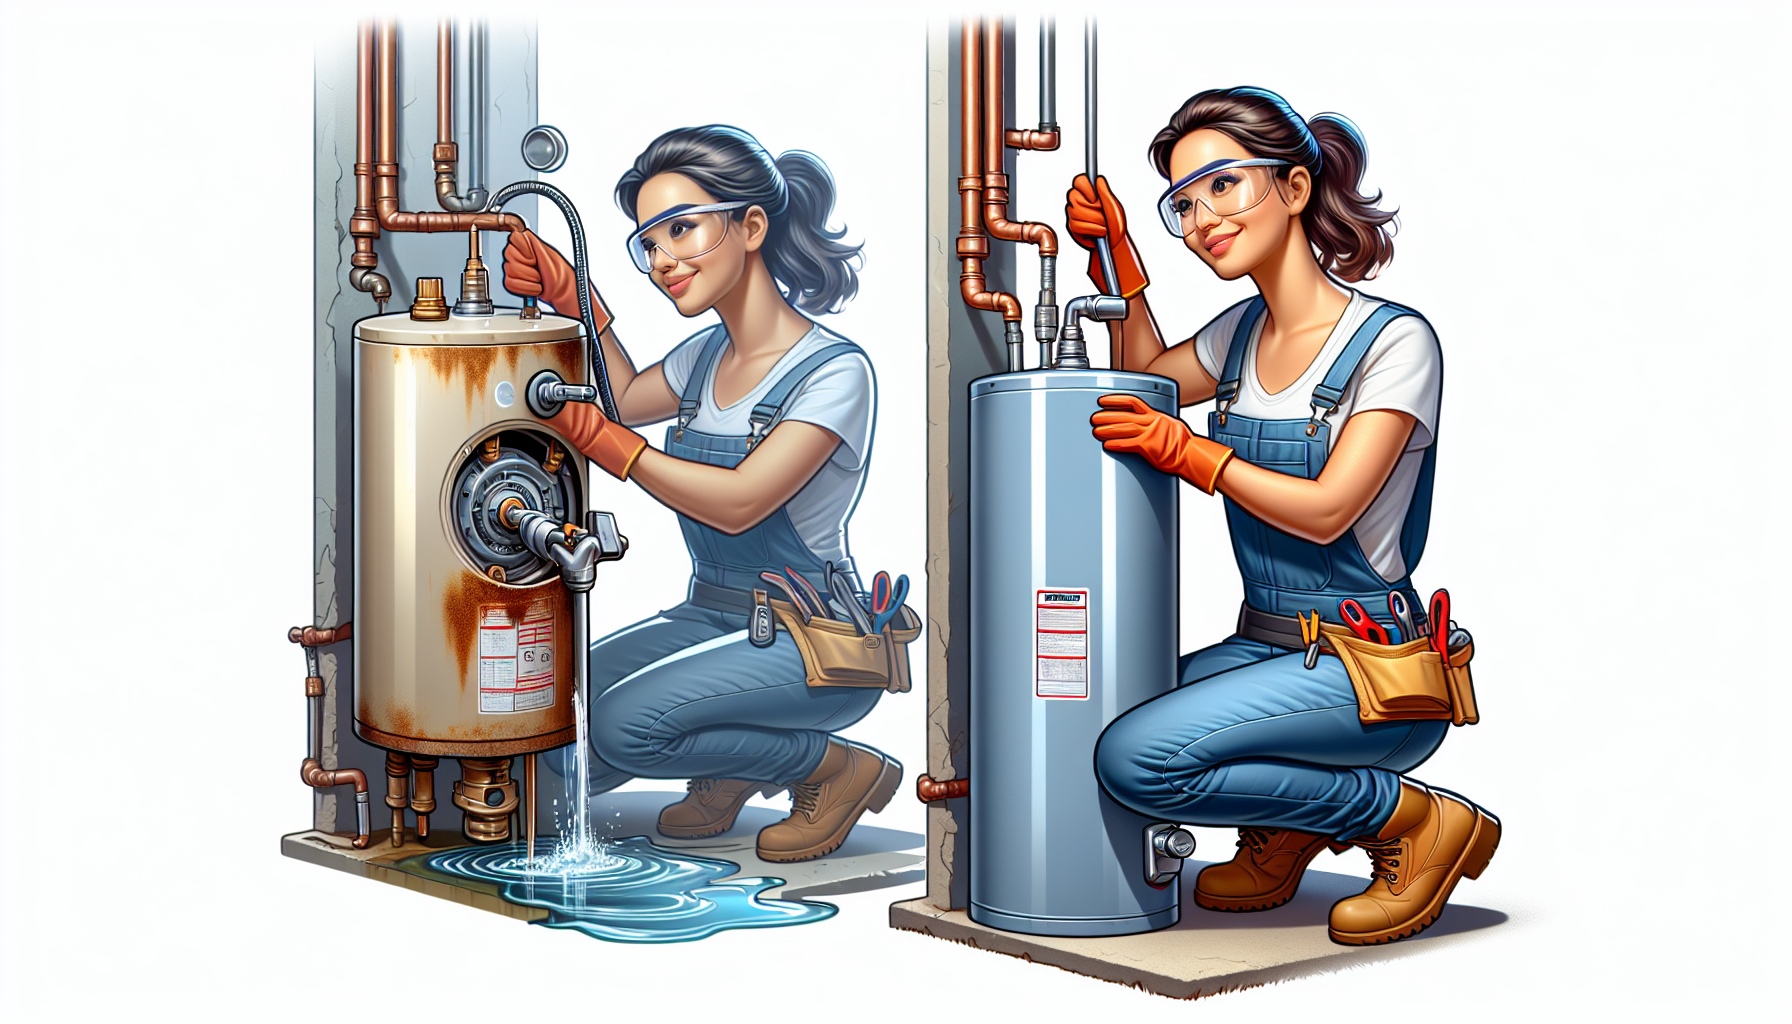 Illustration of an old water heater being replaced